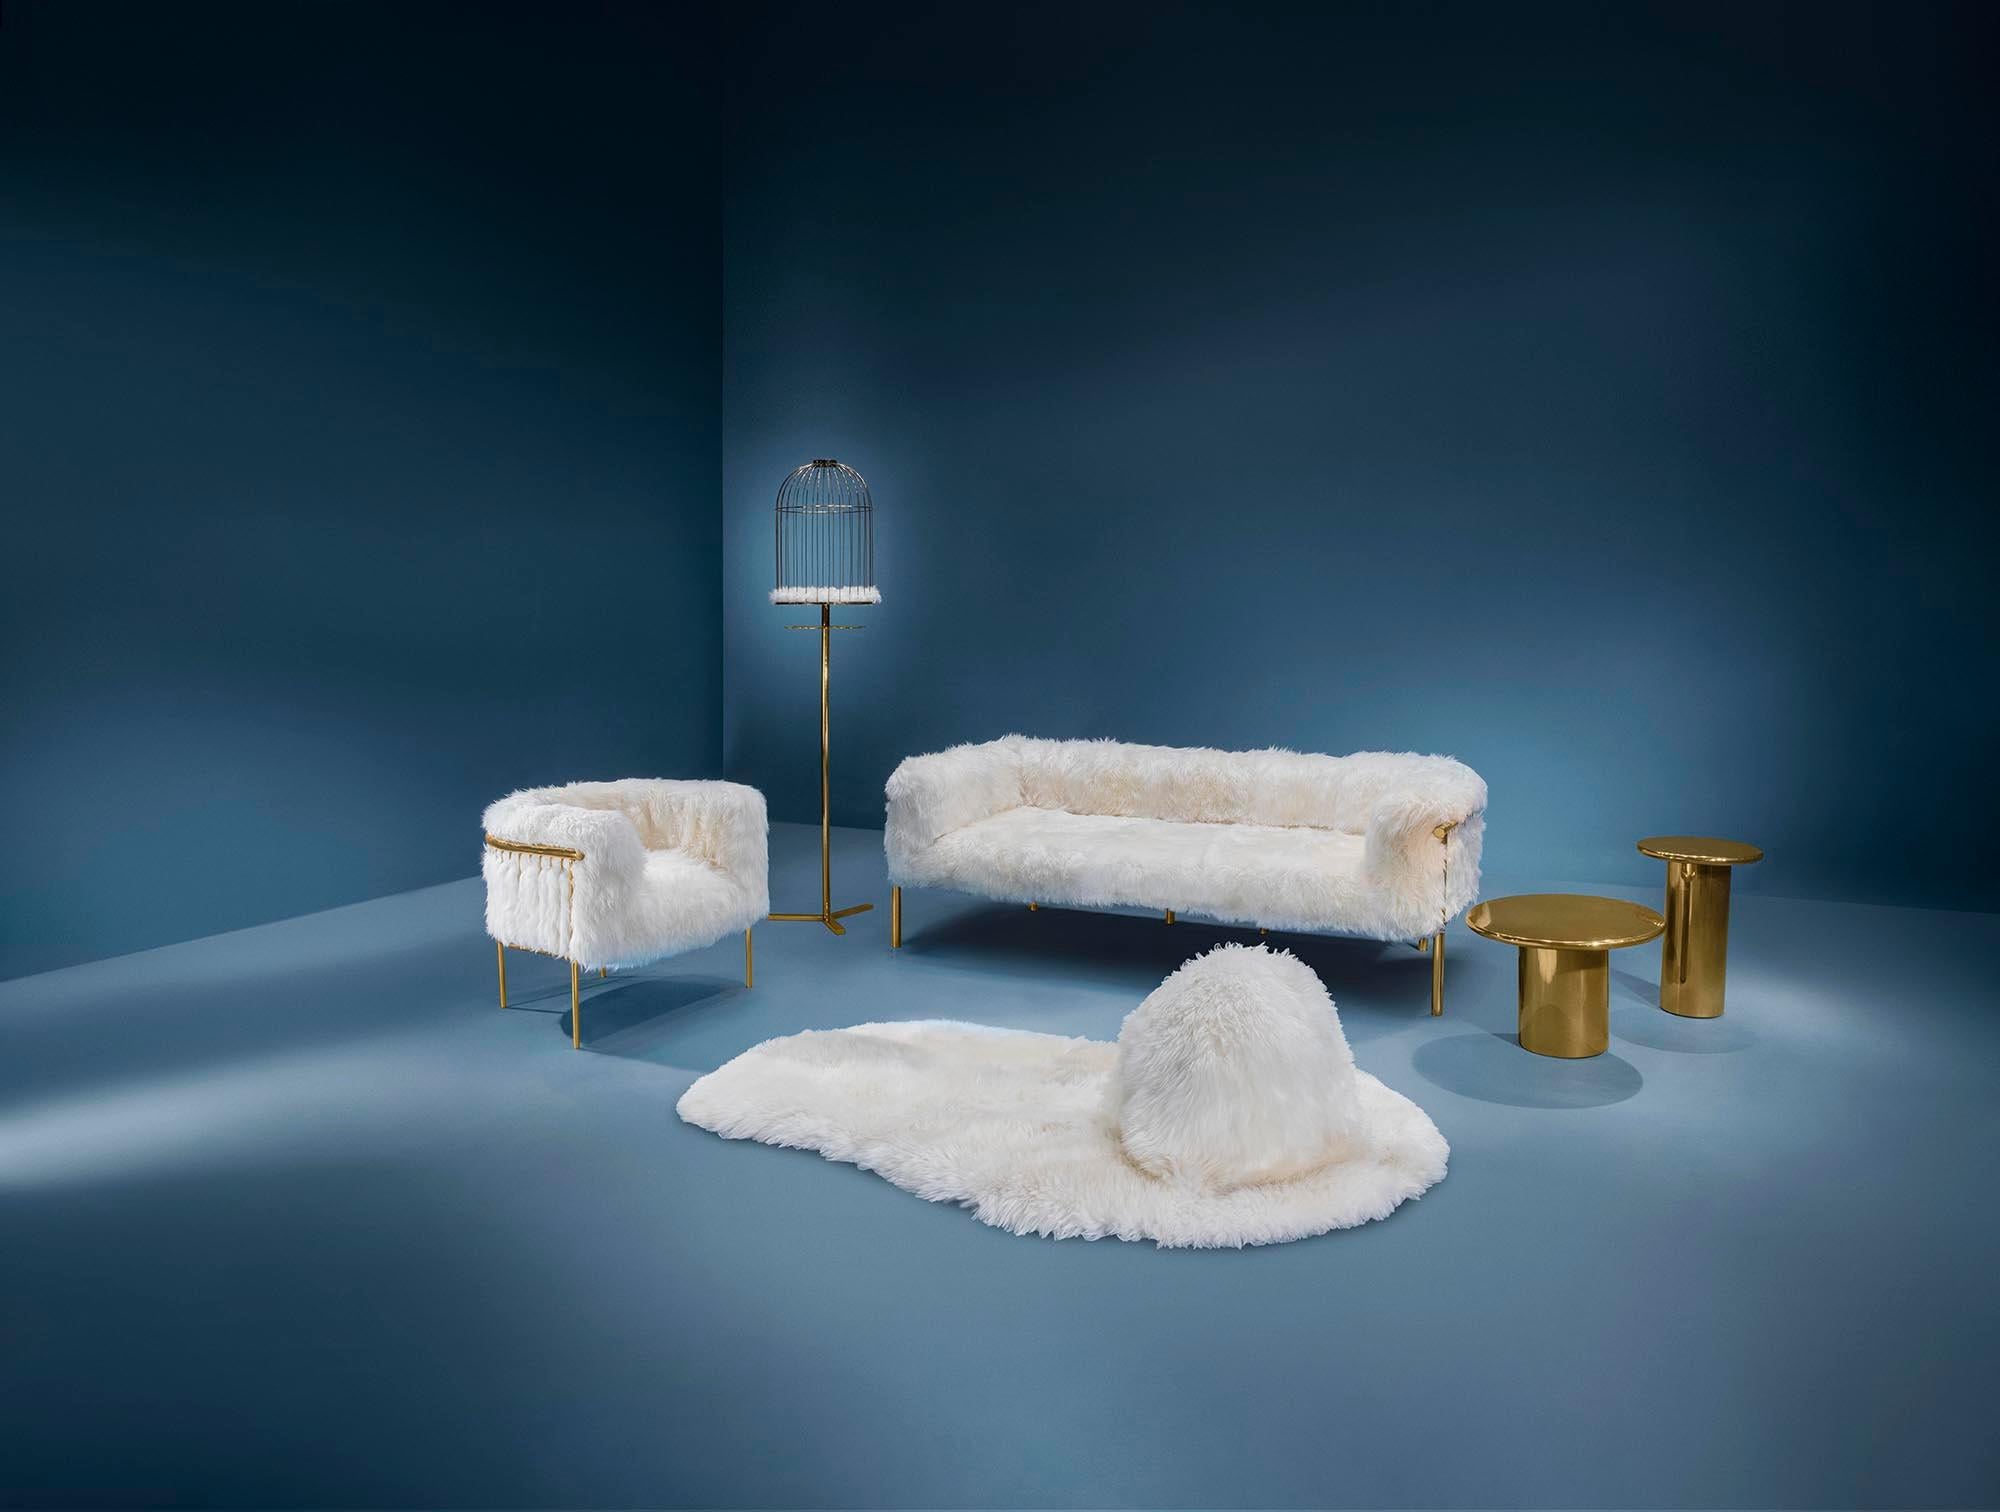 Coronum Sheepskin Gold Coat Hanger by Artefatto Design Studio steps beyond the mundane, with a sheepskin lined, gilded cafe to house artifacts. 

Artefatto Design Studio have indulgently worked on this alluring collection, crossing the boundaries